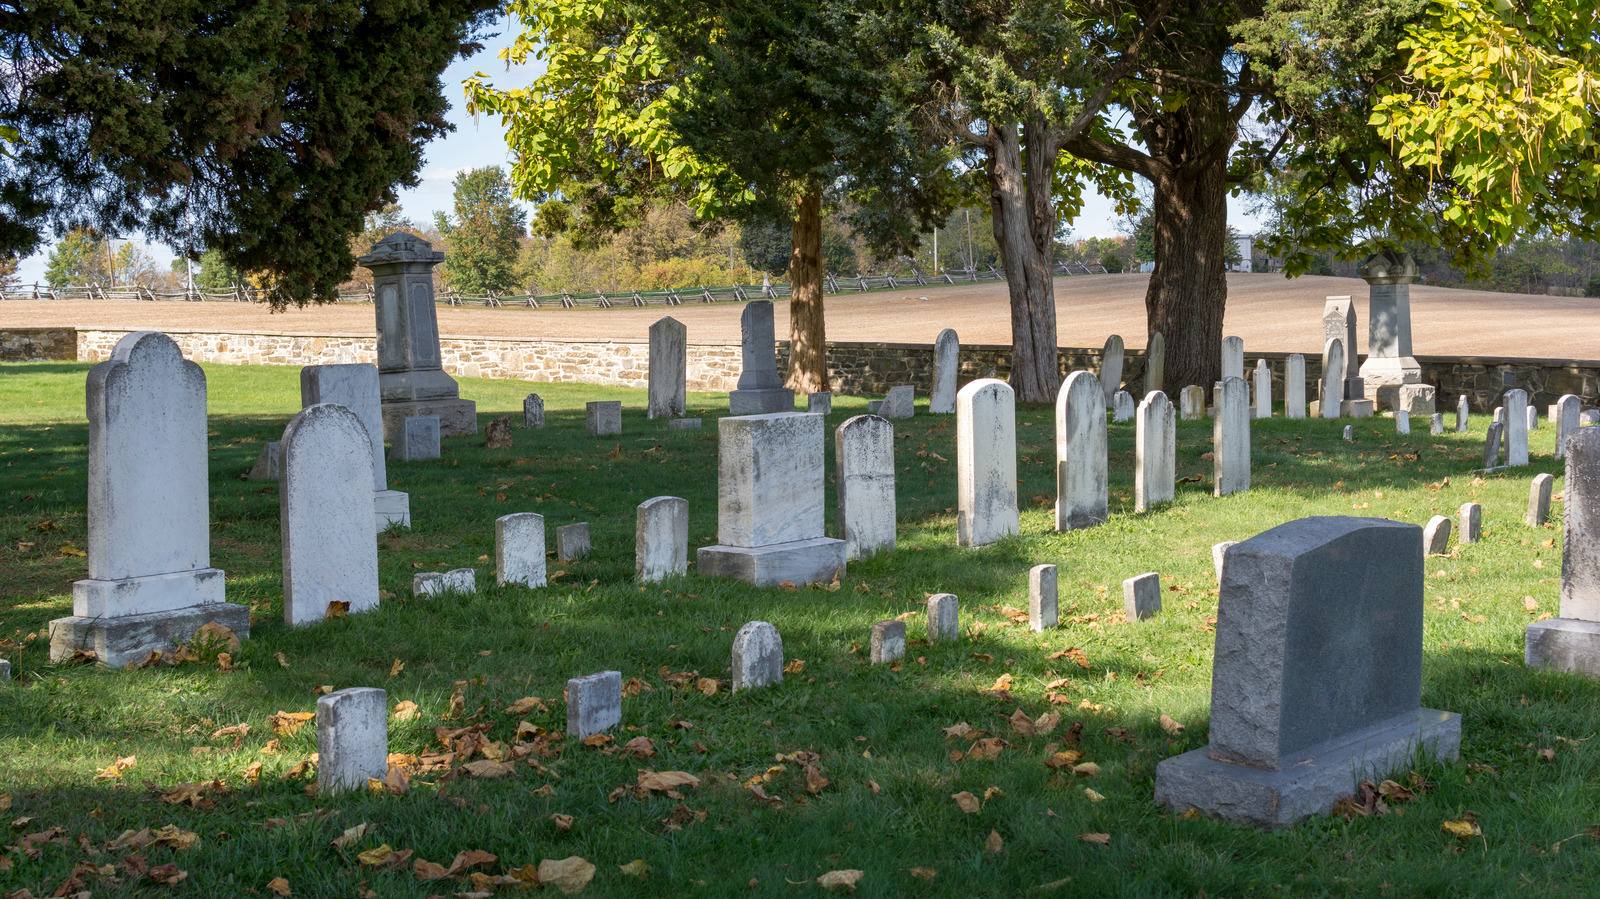 What Happened To The Bodies Of Civil War Soldiers Who Died In Battle? – Grunge